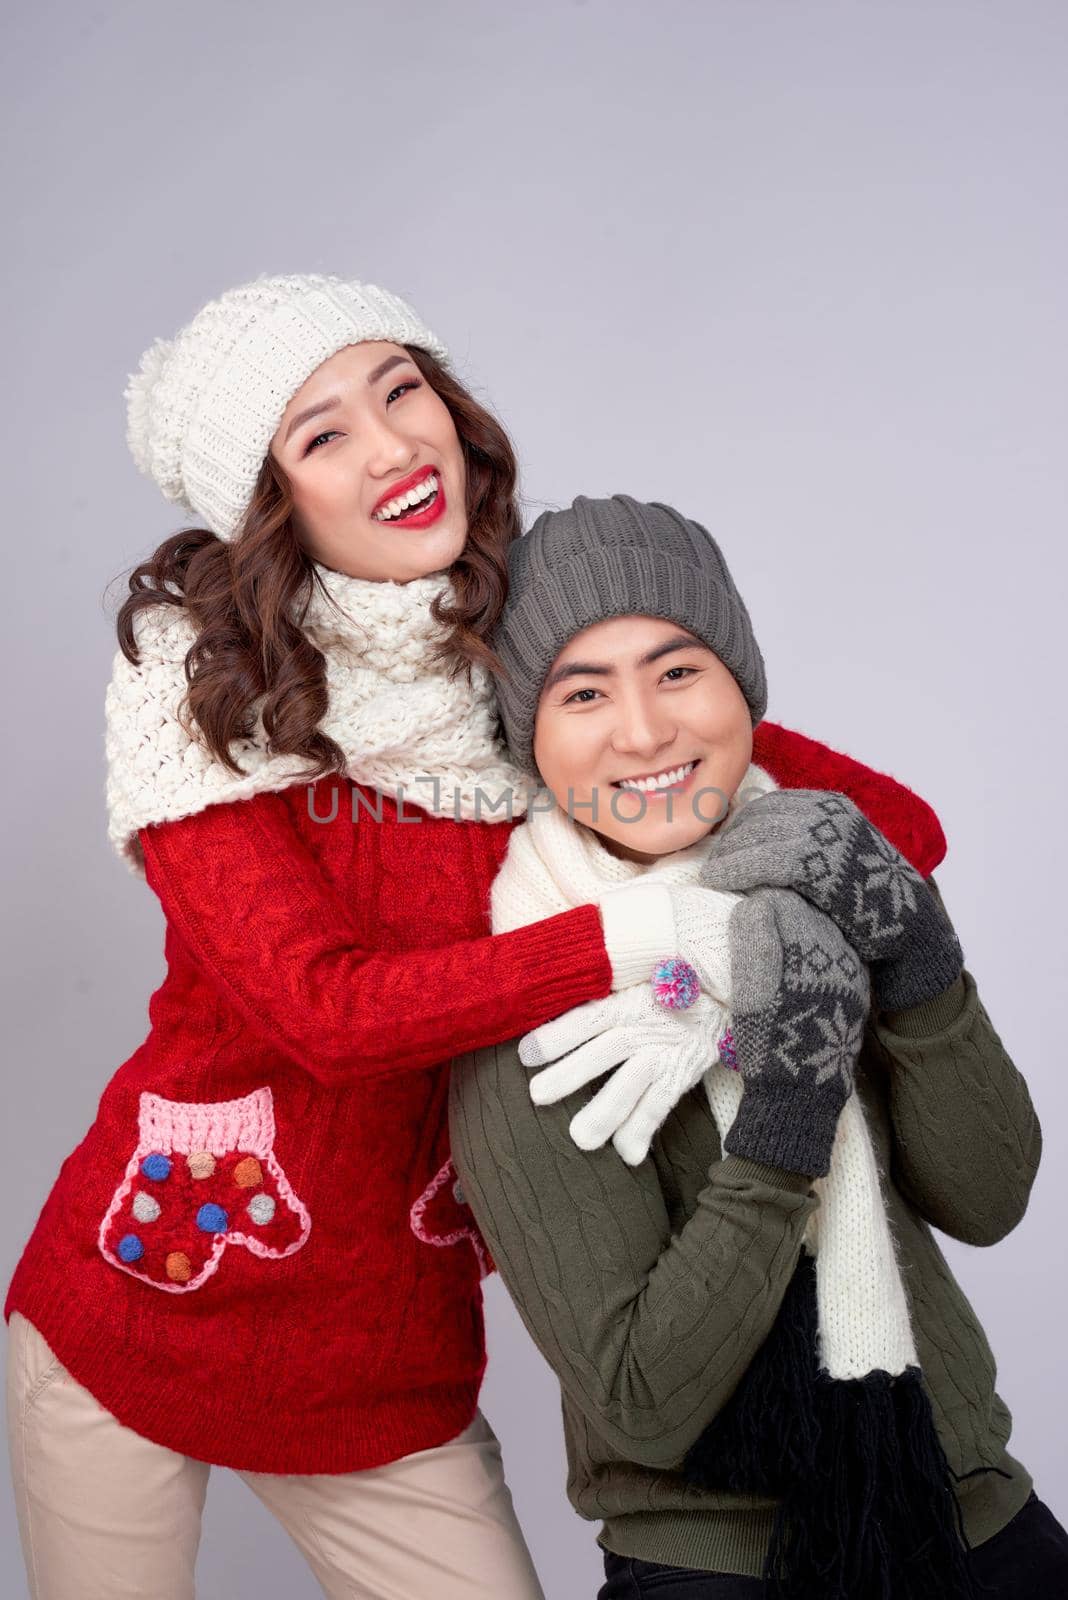 Happy young lovers in knitted woolen clothing hugging and looking together.